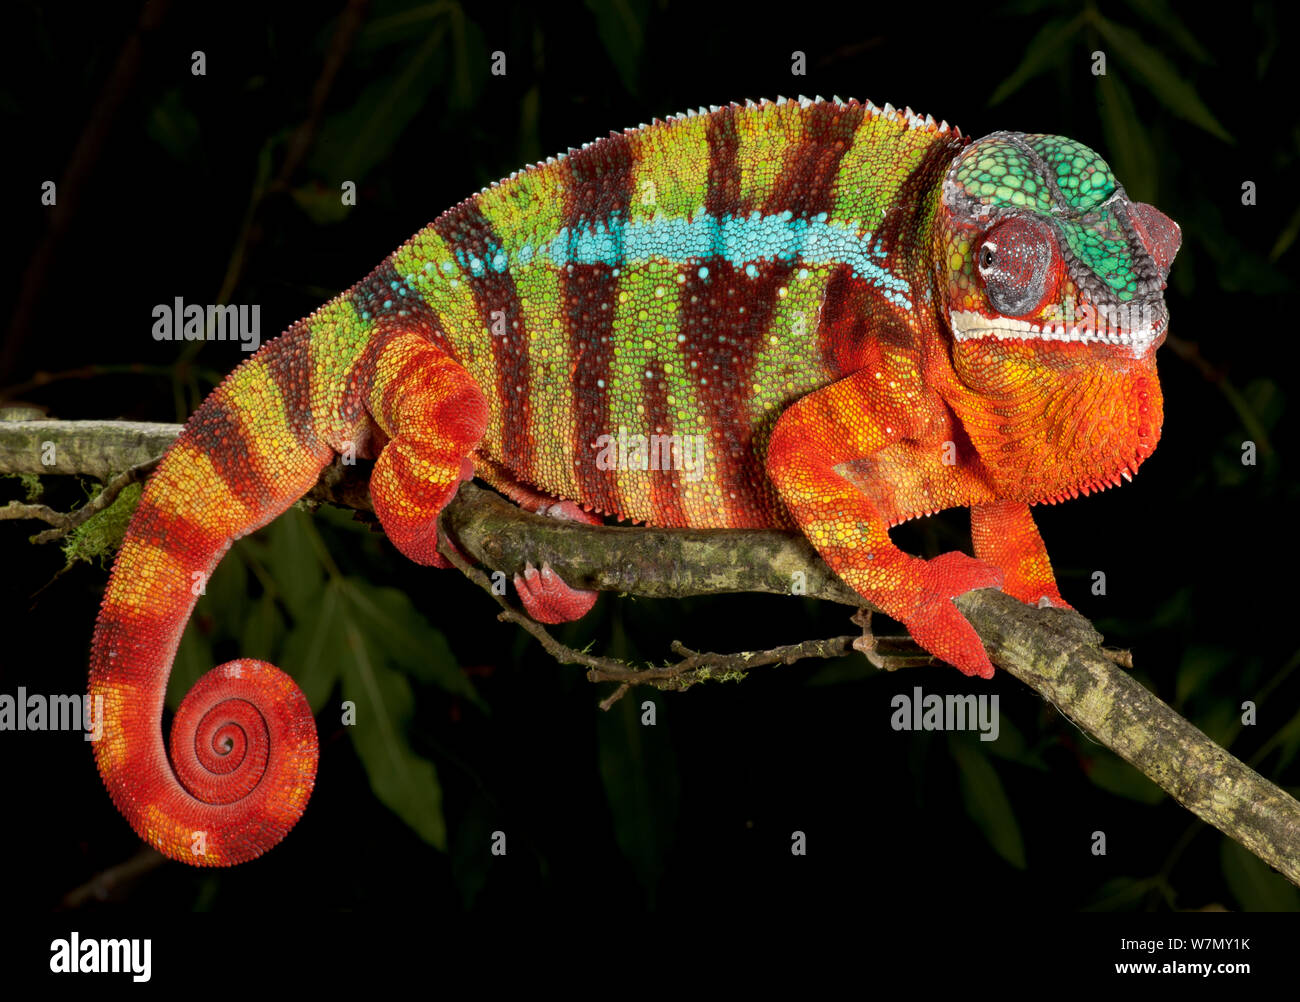 Panther chameleon (Furcifer pardalis) striped red, green and brown, on branch, captive, from Madagascar Stock Photo